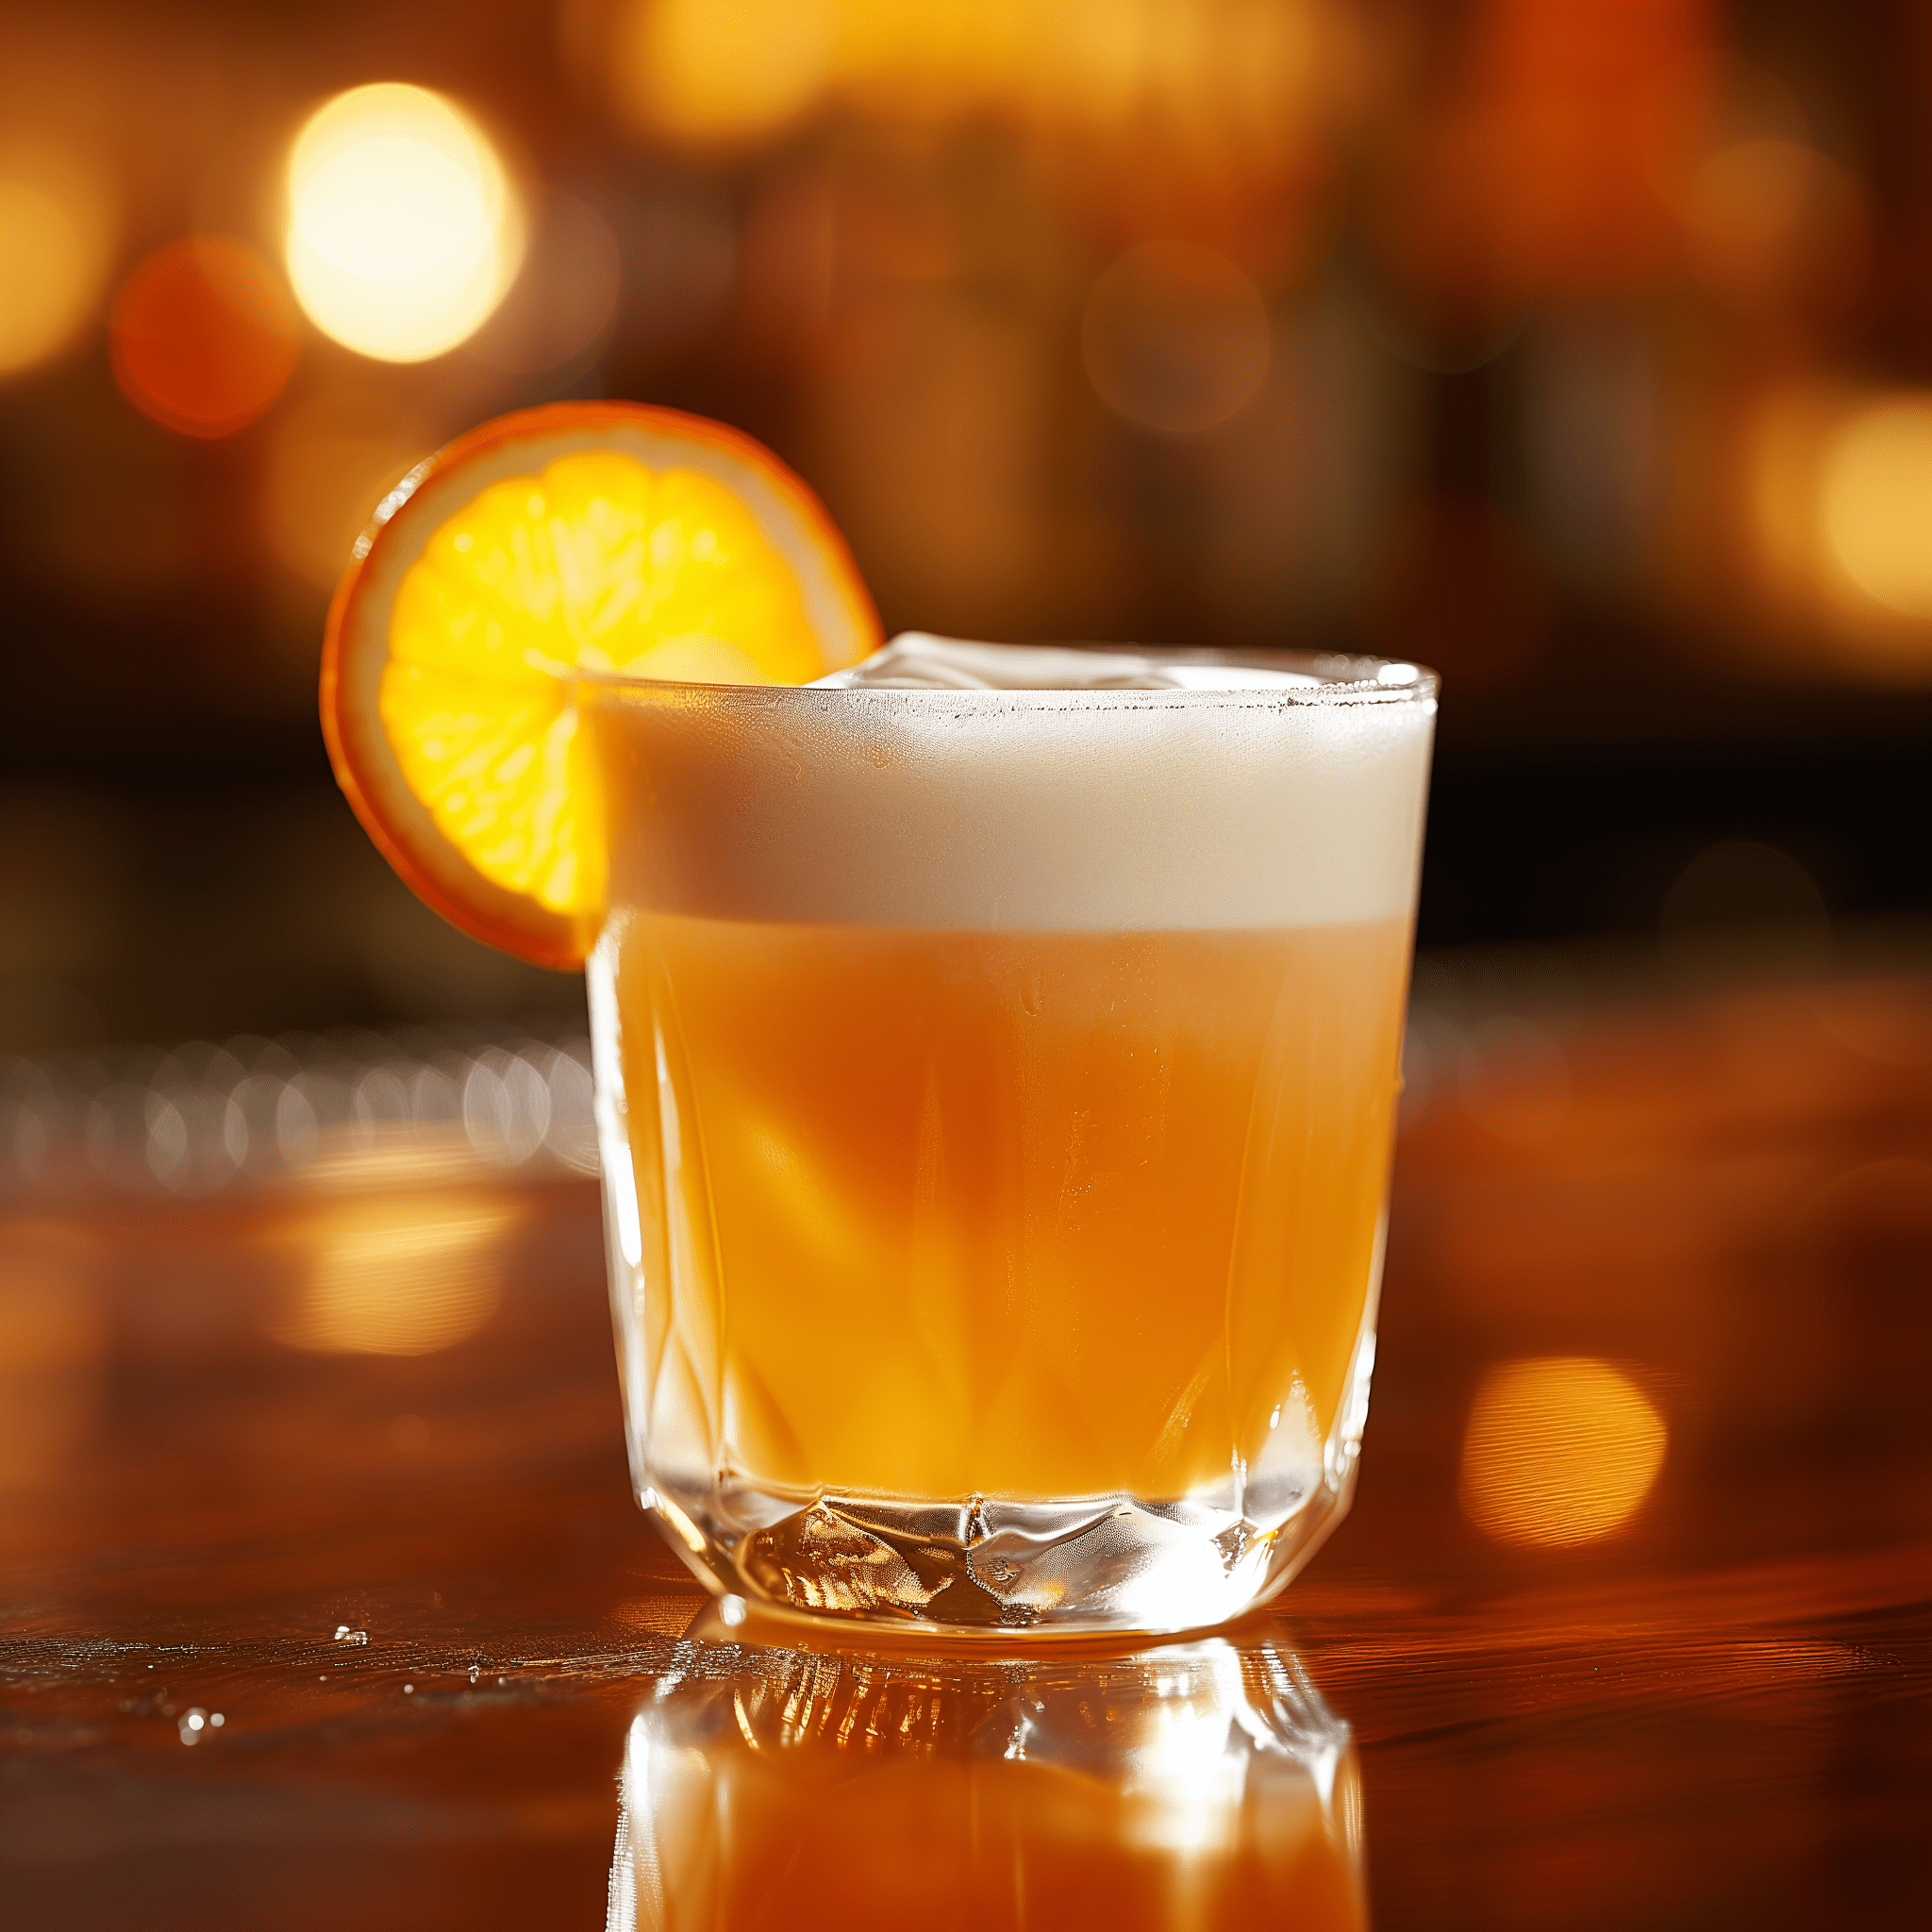 Southern Comfort Sour Cocktail Recipe - The Southern Comfort Sour offers a harmonious blend of sweetness from the peach liqueur and the tartness of the sour mix. It's a robust cocktail with a fruity profile that's both refreshing and satisfying.